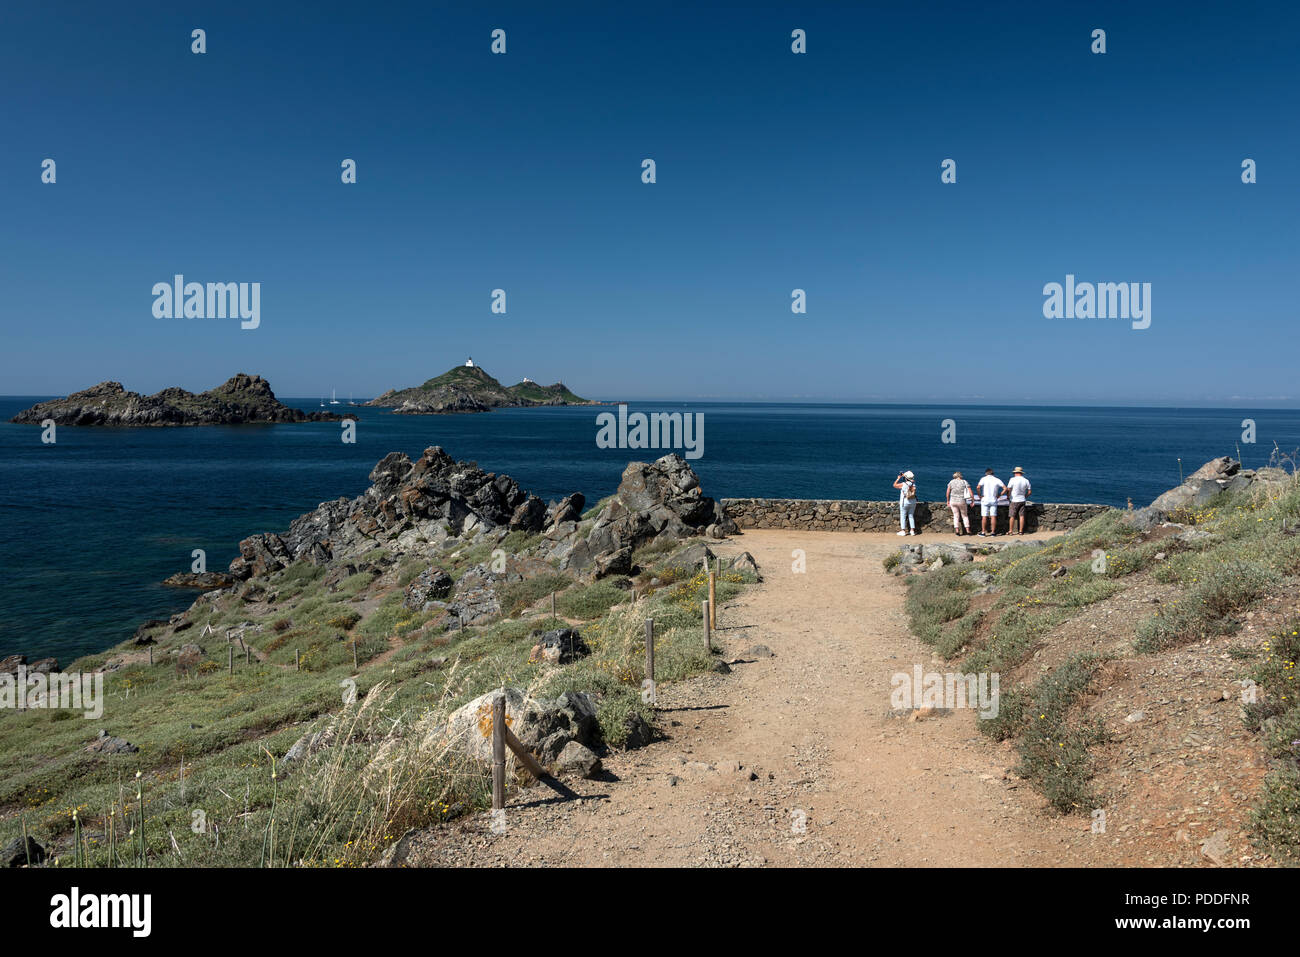 Visitors at the end of the paved path on Pointe de la Parata, ( Point of Parata ) on Corsica towards a chain of small islands, Les Archipel des Sangui Stock Photo